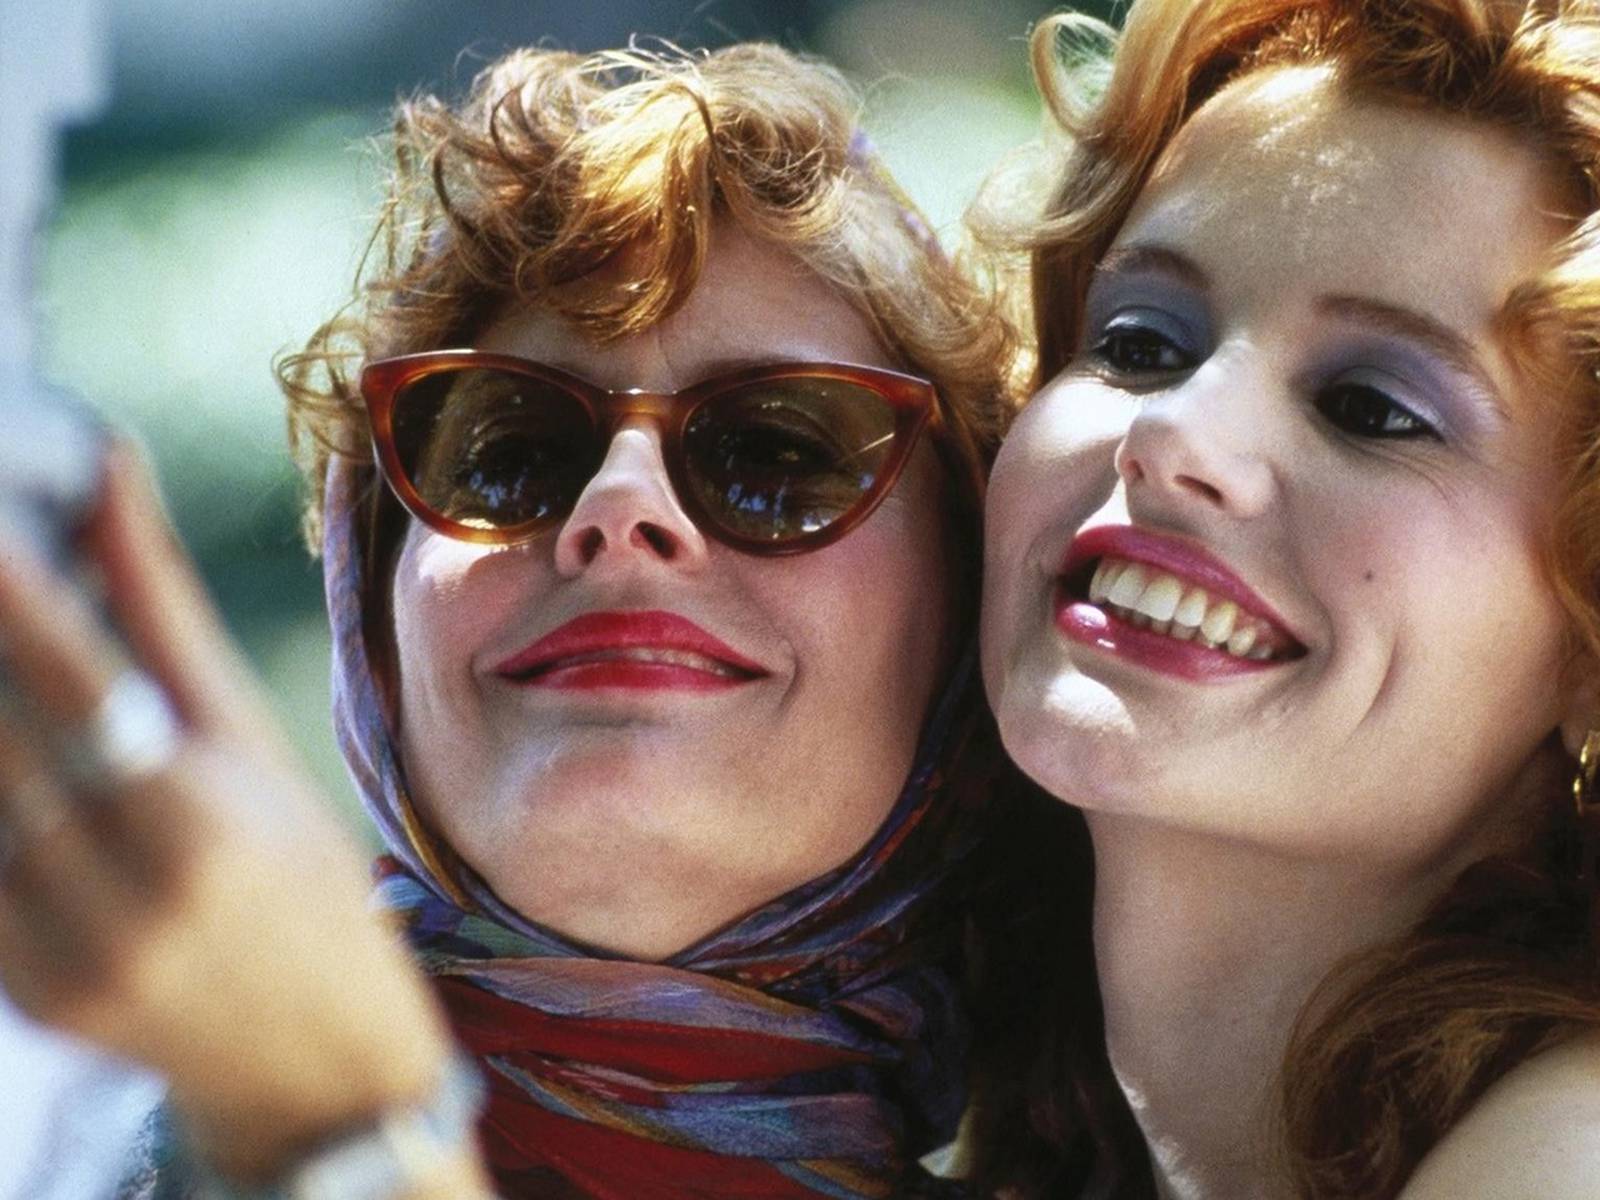 Thelma and Louise Almost Cast Michelle Pfeiffer and Jodie Foster - The  Making of Thelma and Louise